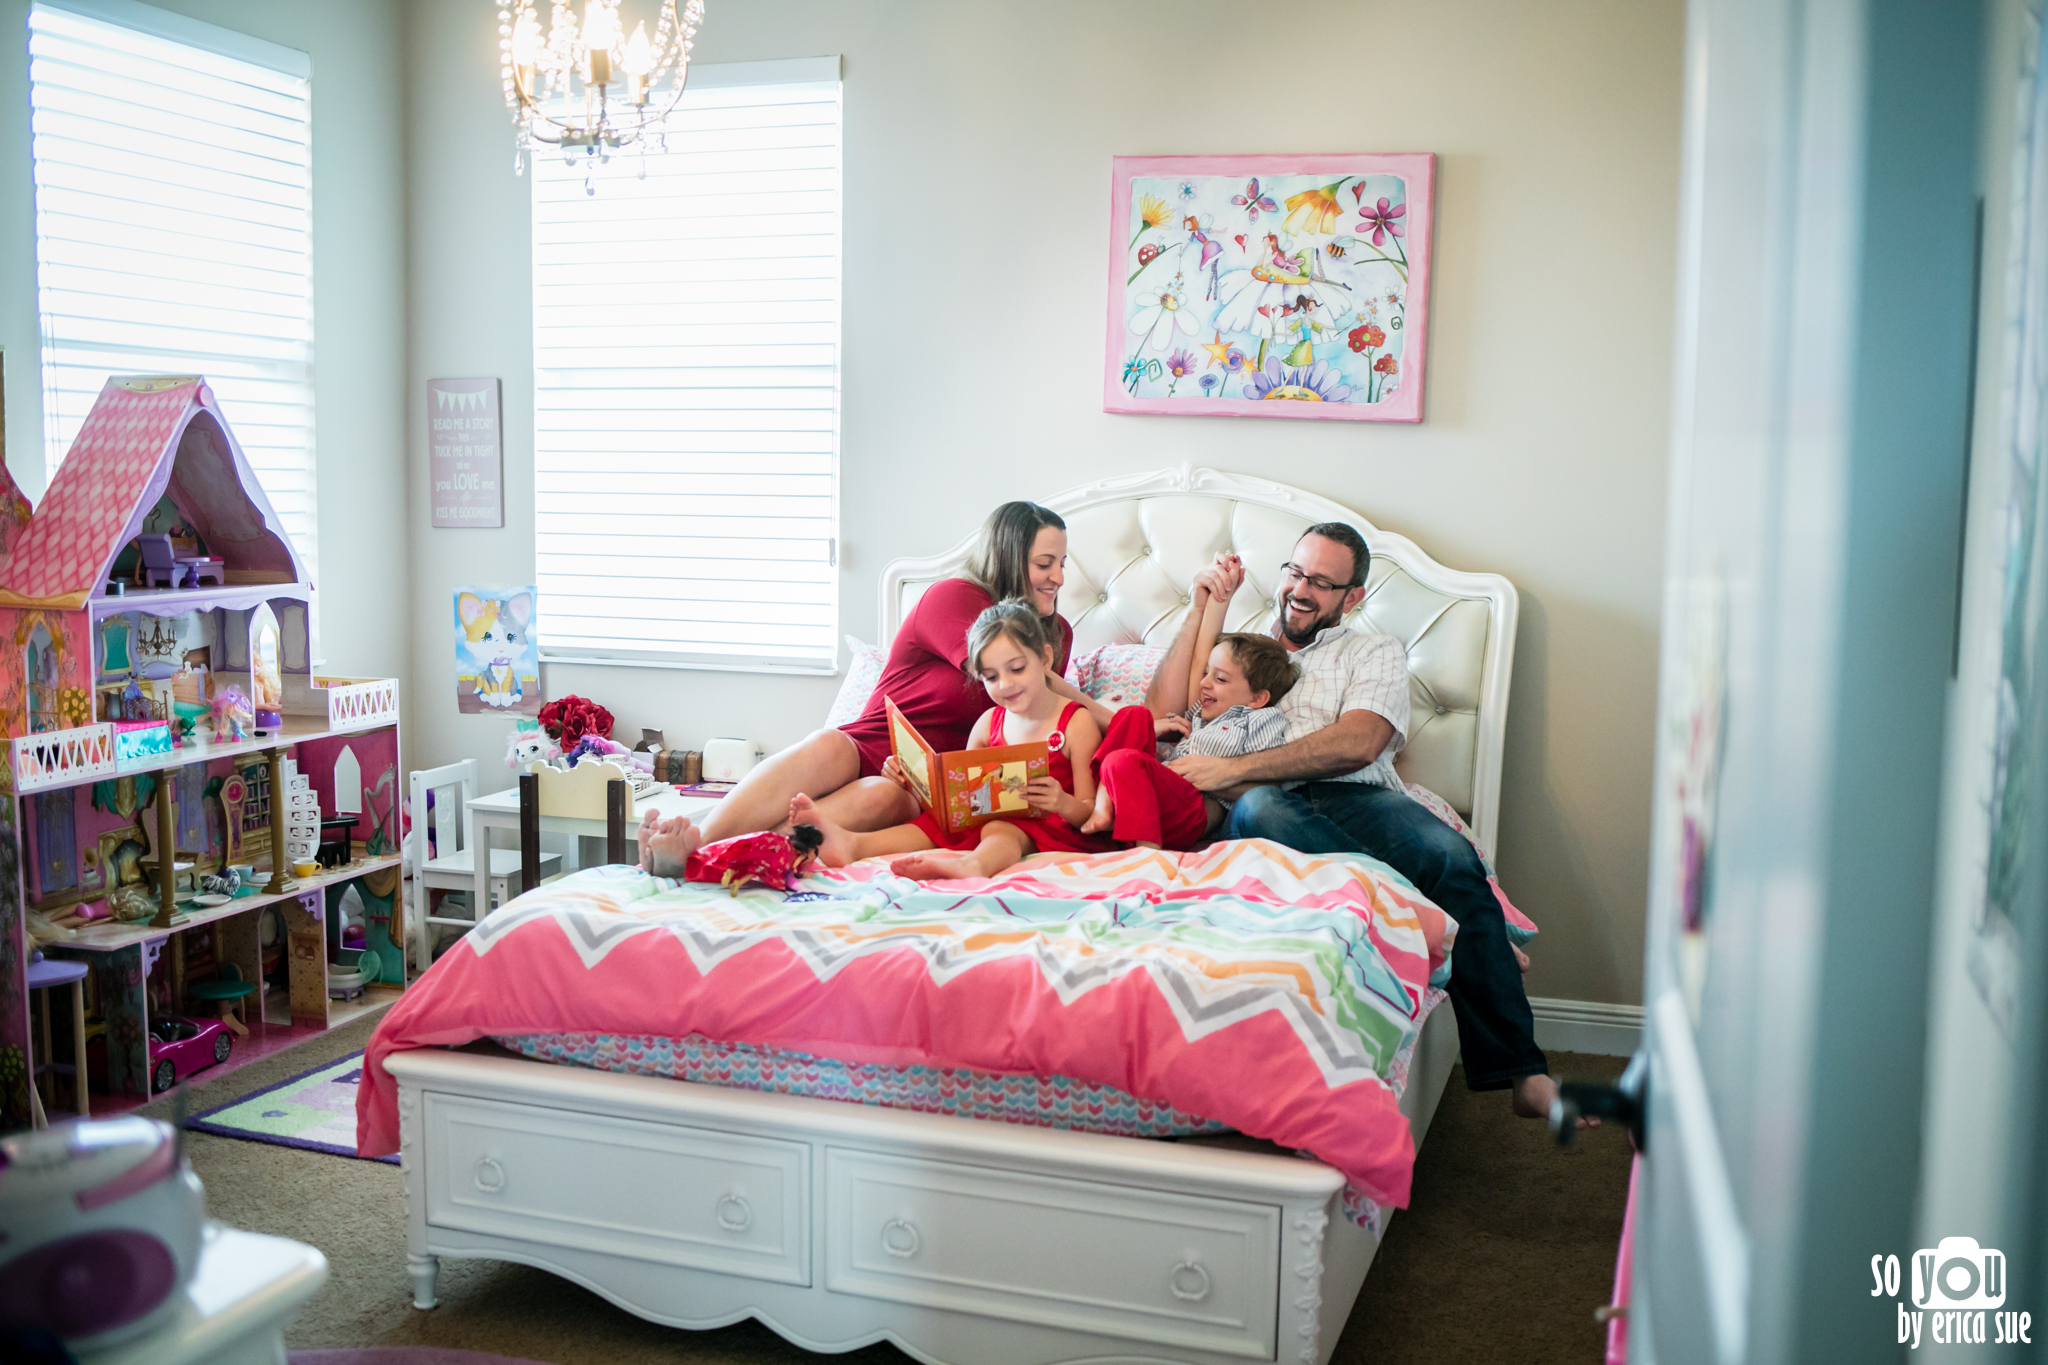 in-home-lifestyle-family-photography-so-you-by-erica-sue-parkland-6526.jpg